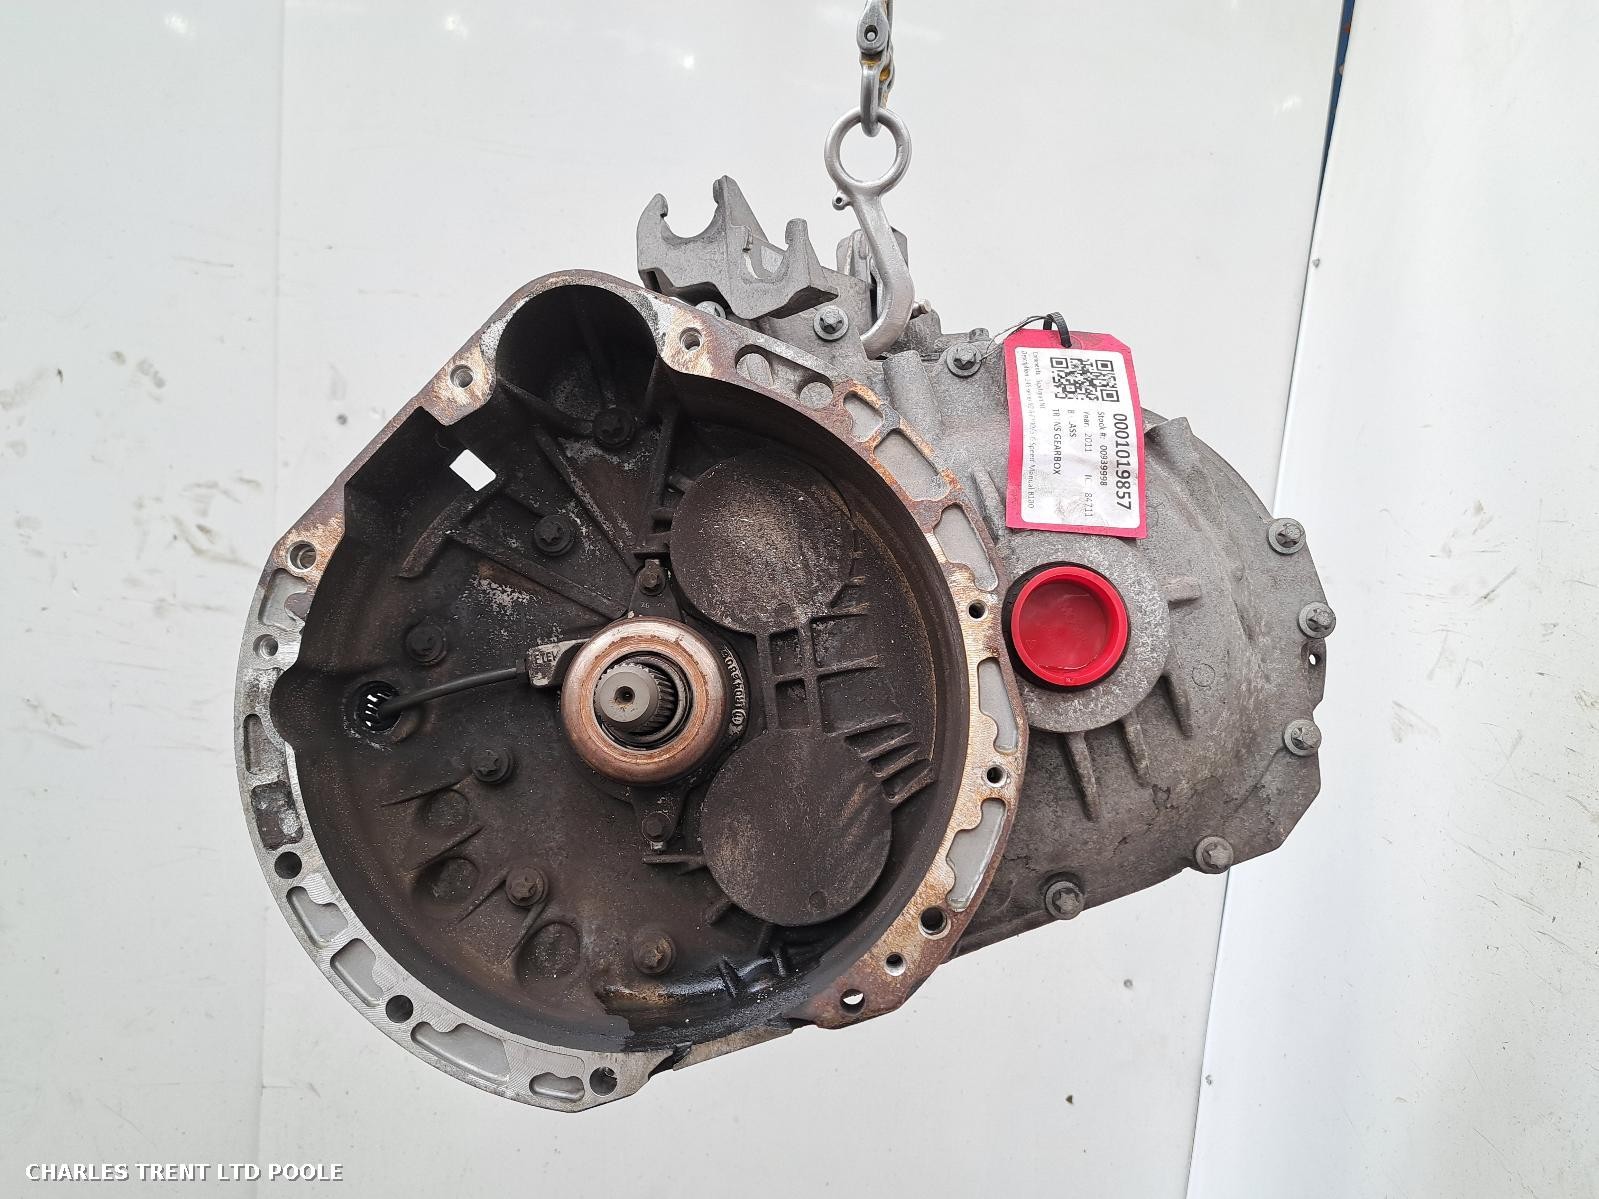 2011 - MERCEDES - B CLASS - GEARBOX / TRANSMISSION